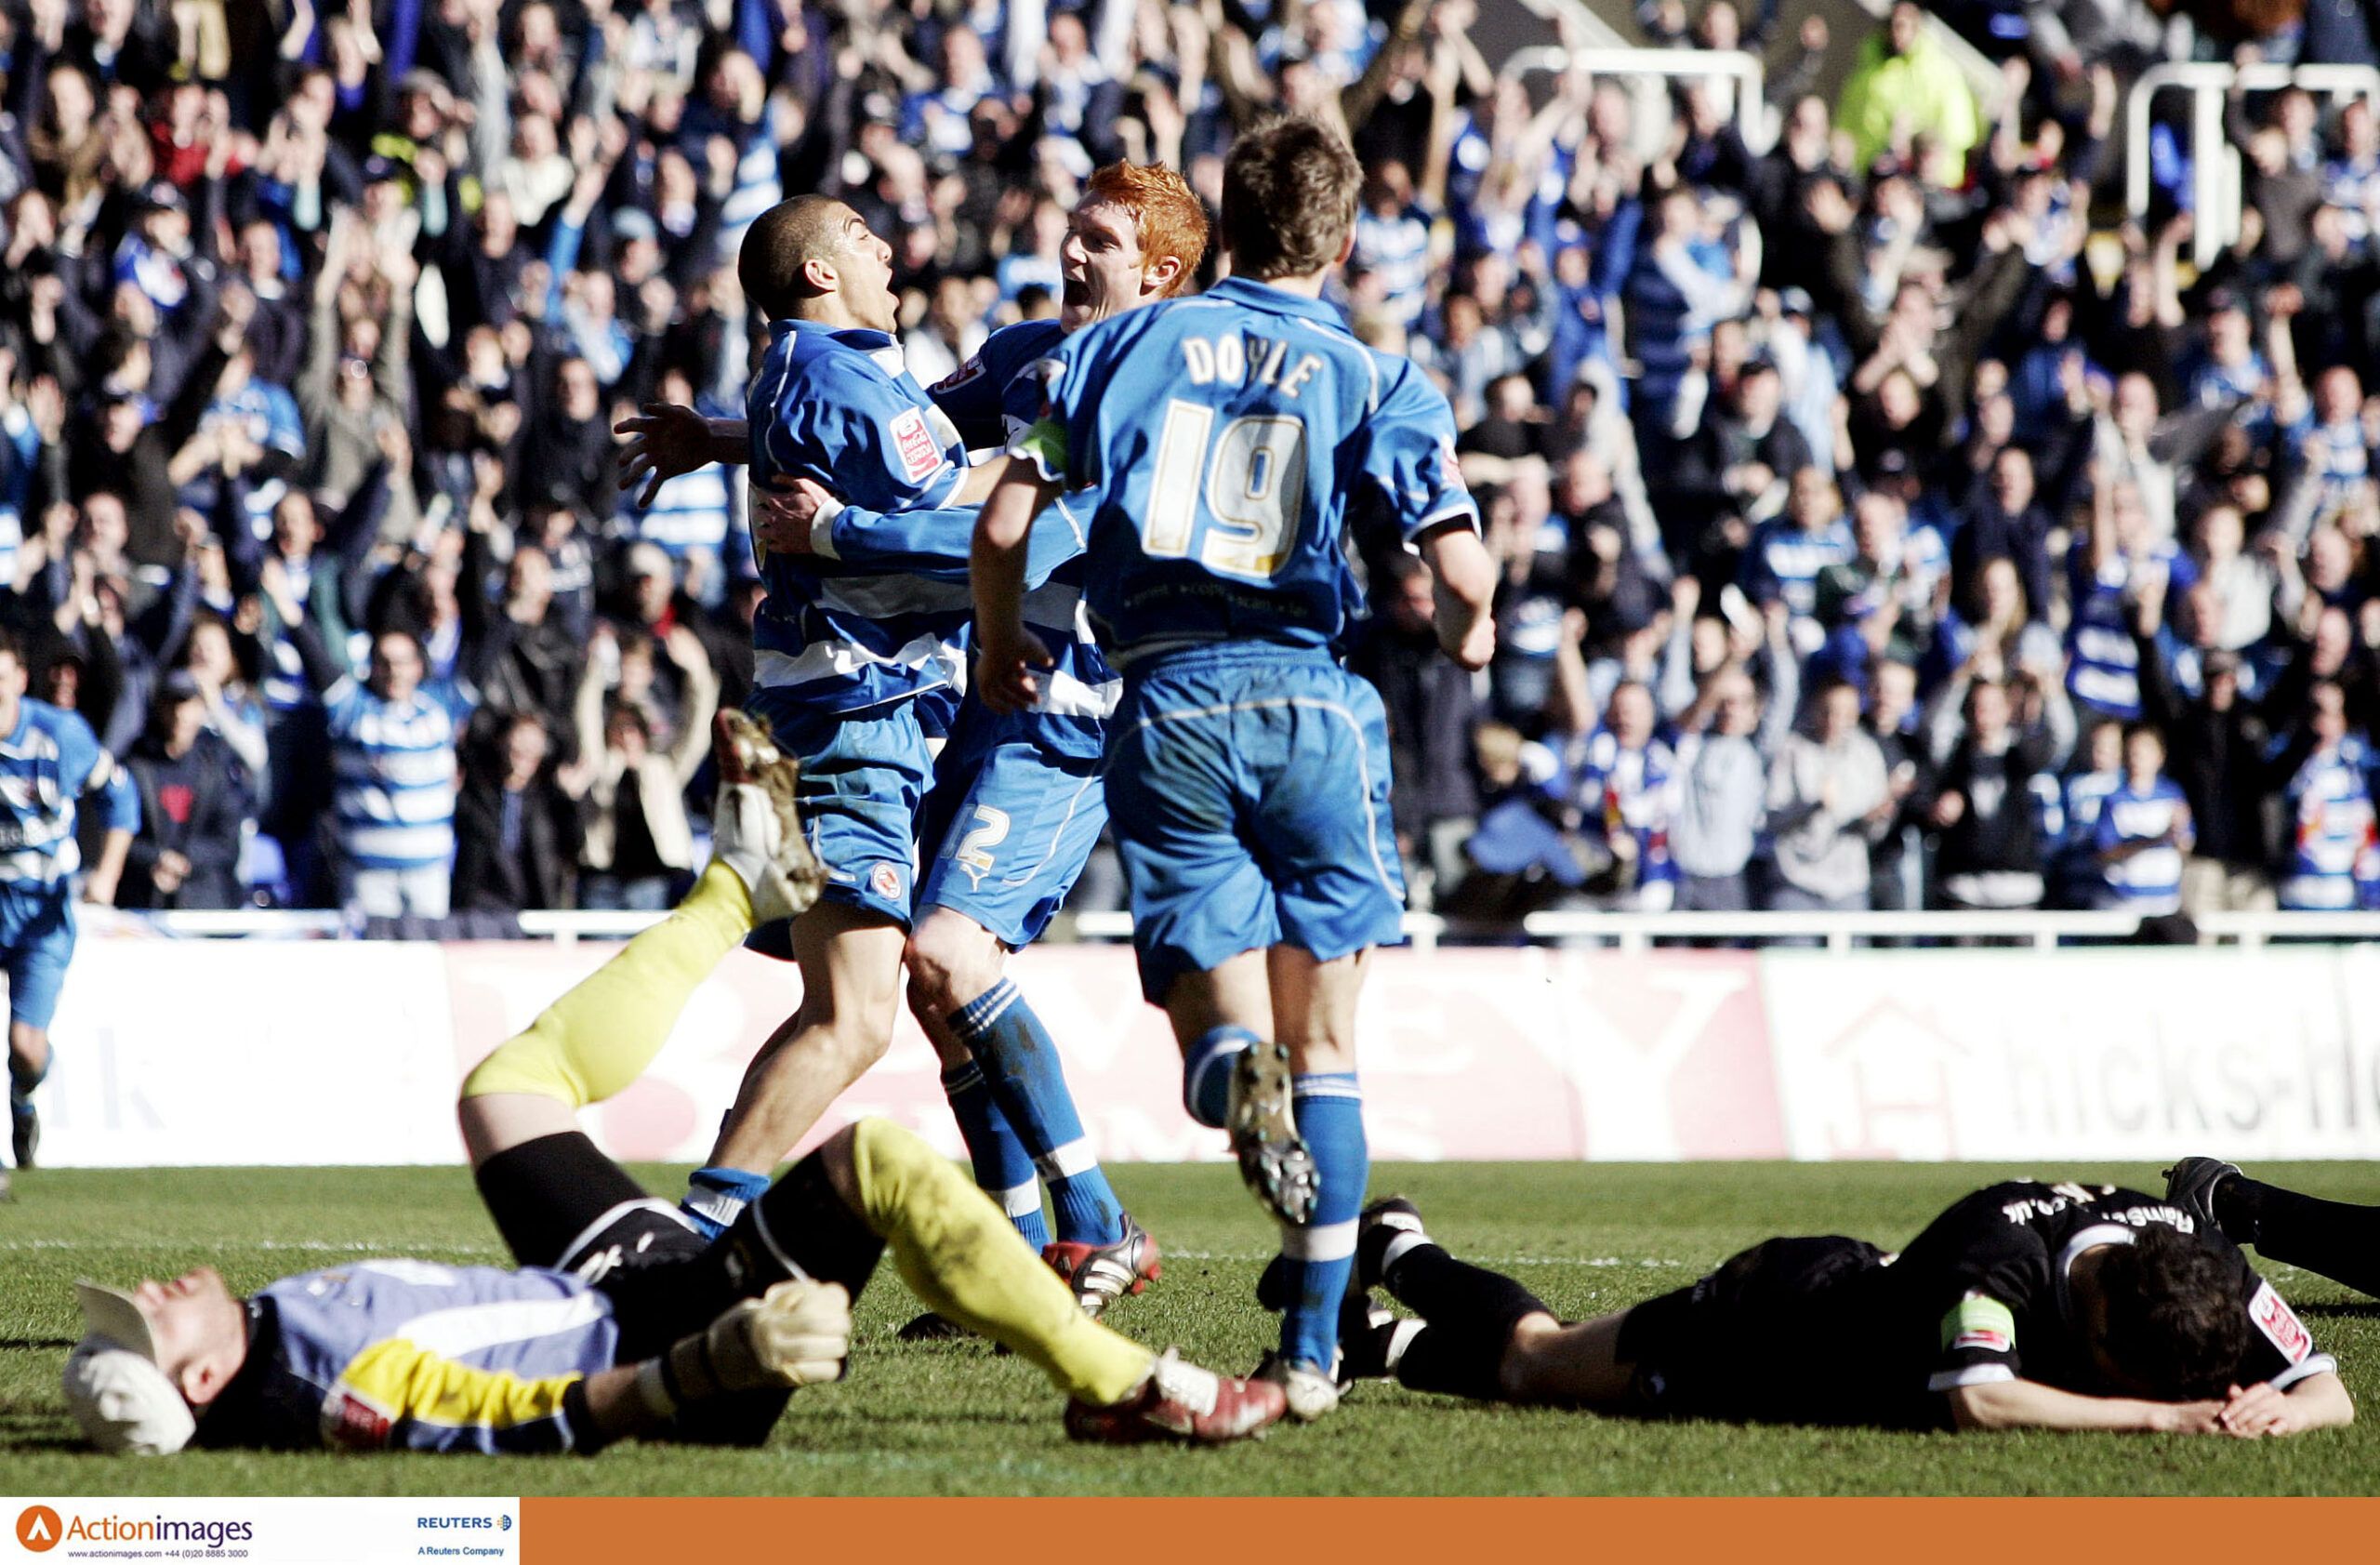 Football - Reading v Derby County Coca-Cola Football League Championship  - The Madejski Stadium - 1/4/06 
James Harper celebrates Reading's first goal with team mates 
Mandatory Credit: Action Images / Andrew Couldridge 
Livepic